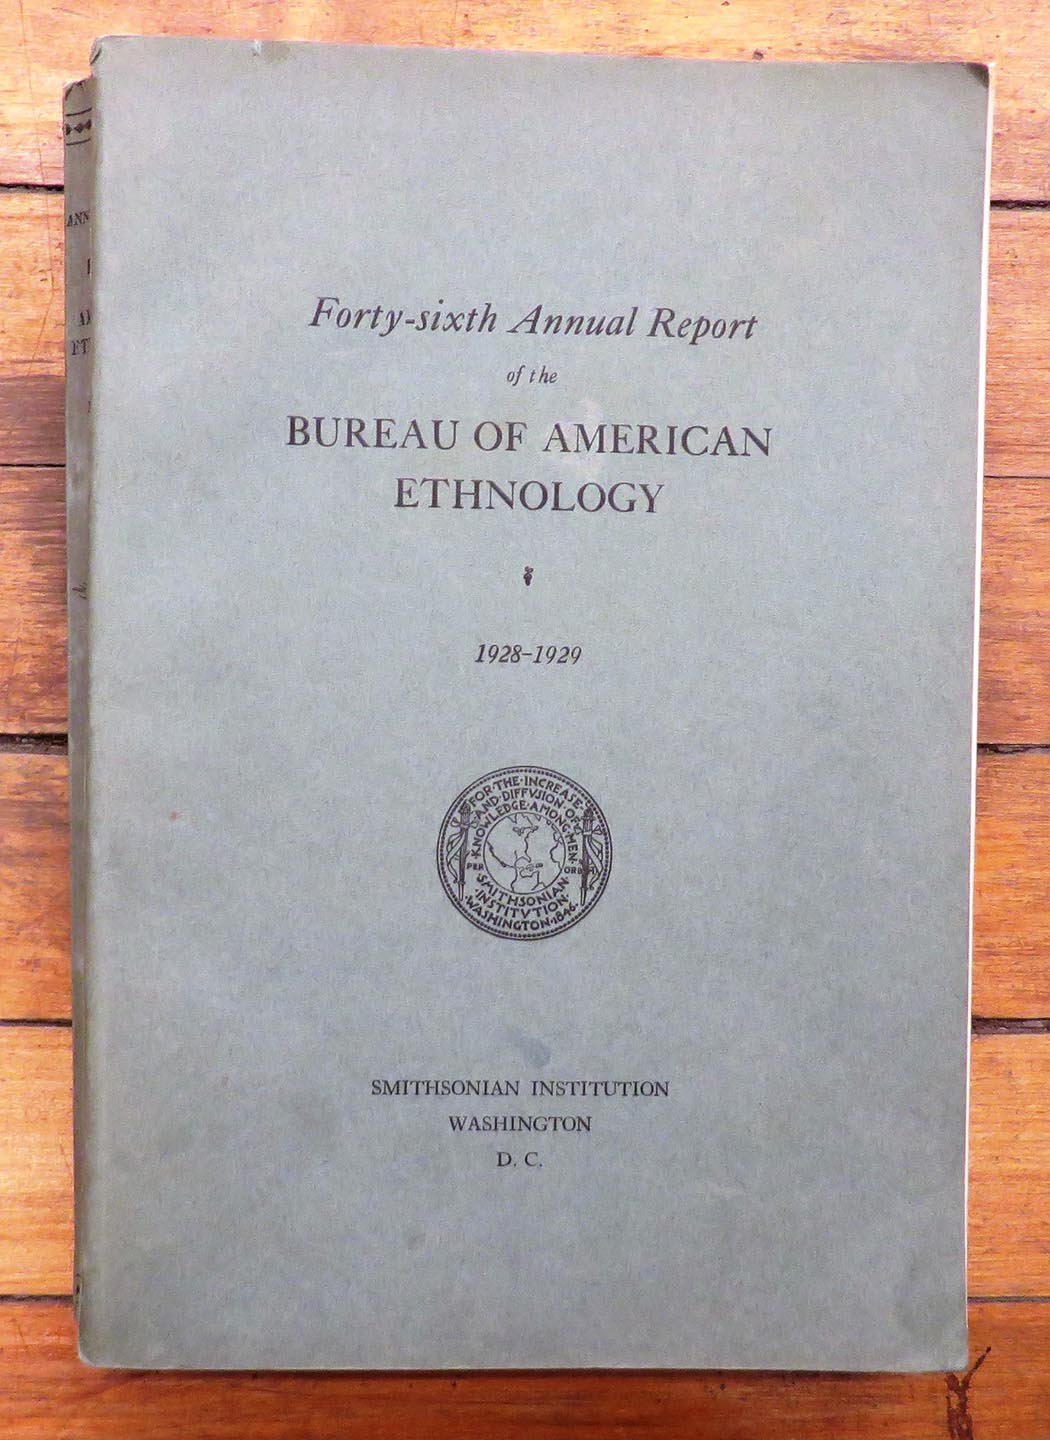 Forty-sixth Annual Report of the Bureau of American Ethnology 1928-1929